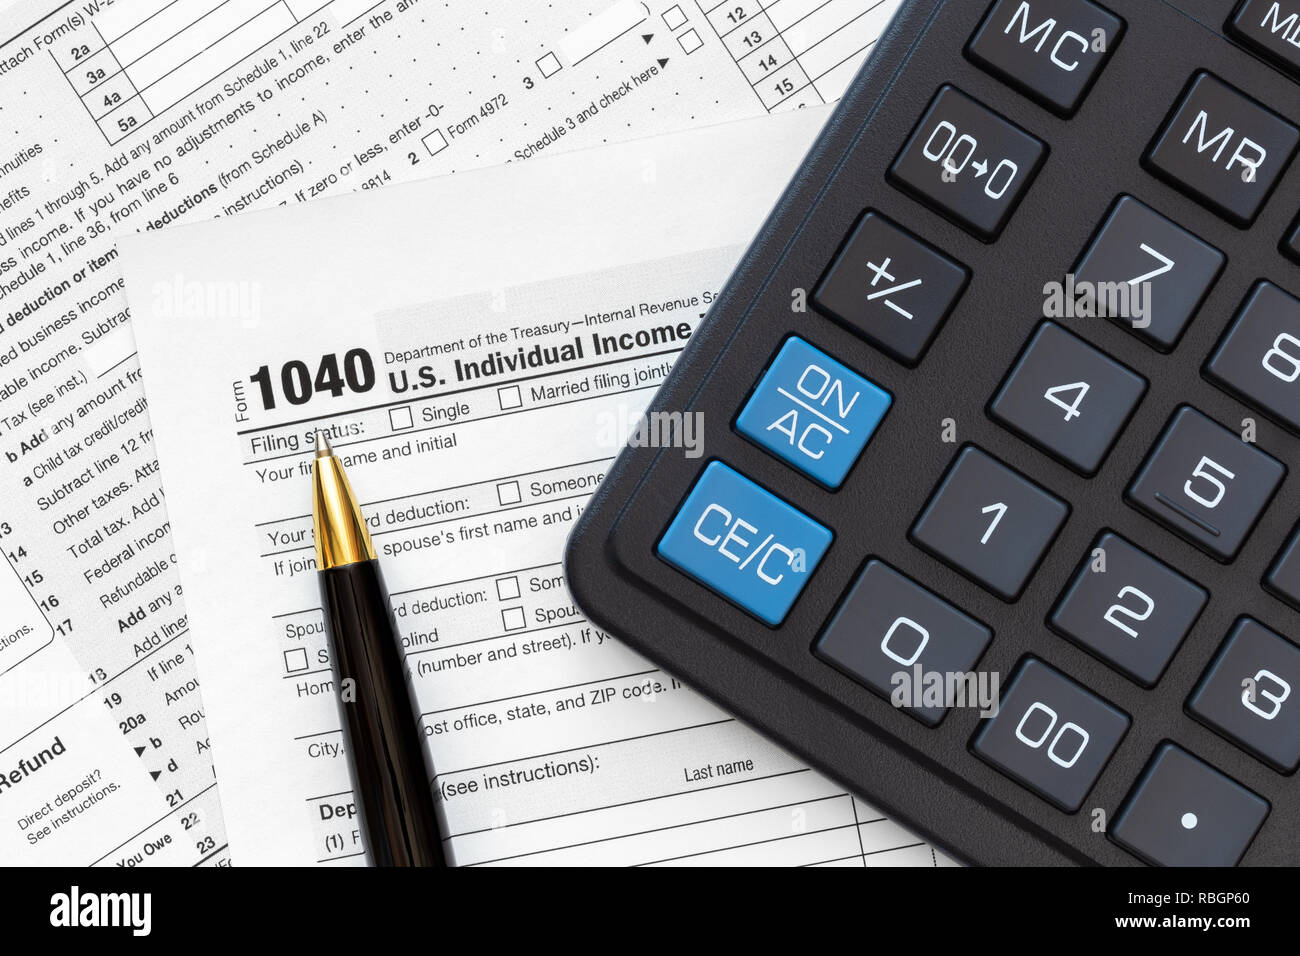 US 1040 tax form. Taxable period. Tax payment concept. Stock Photo